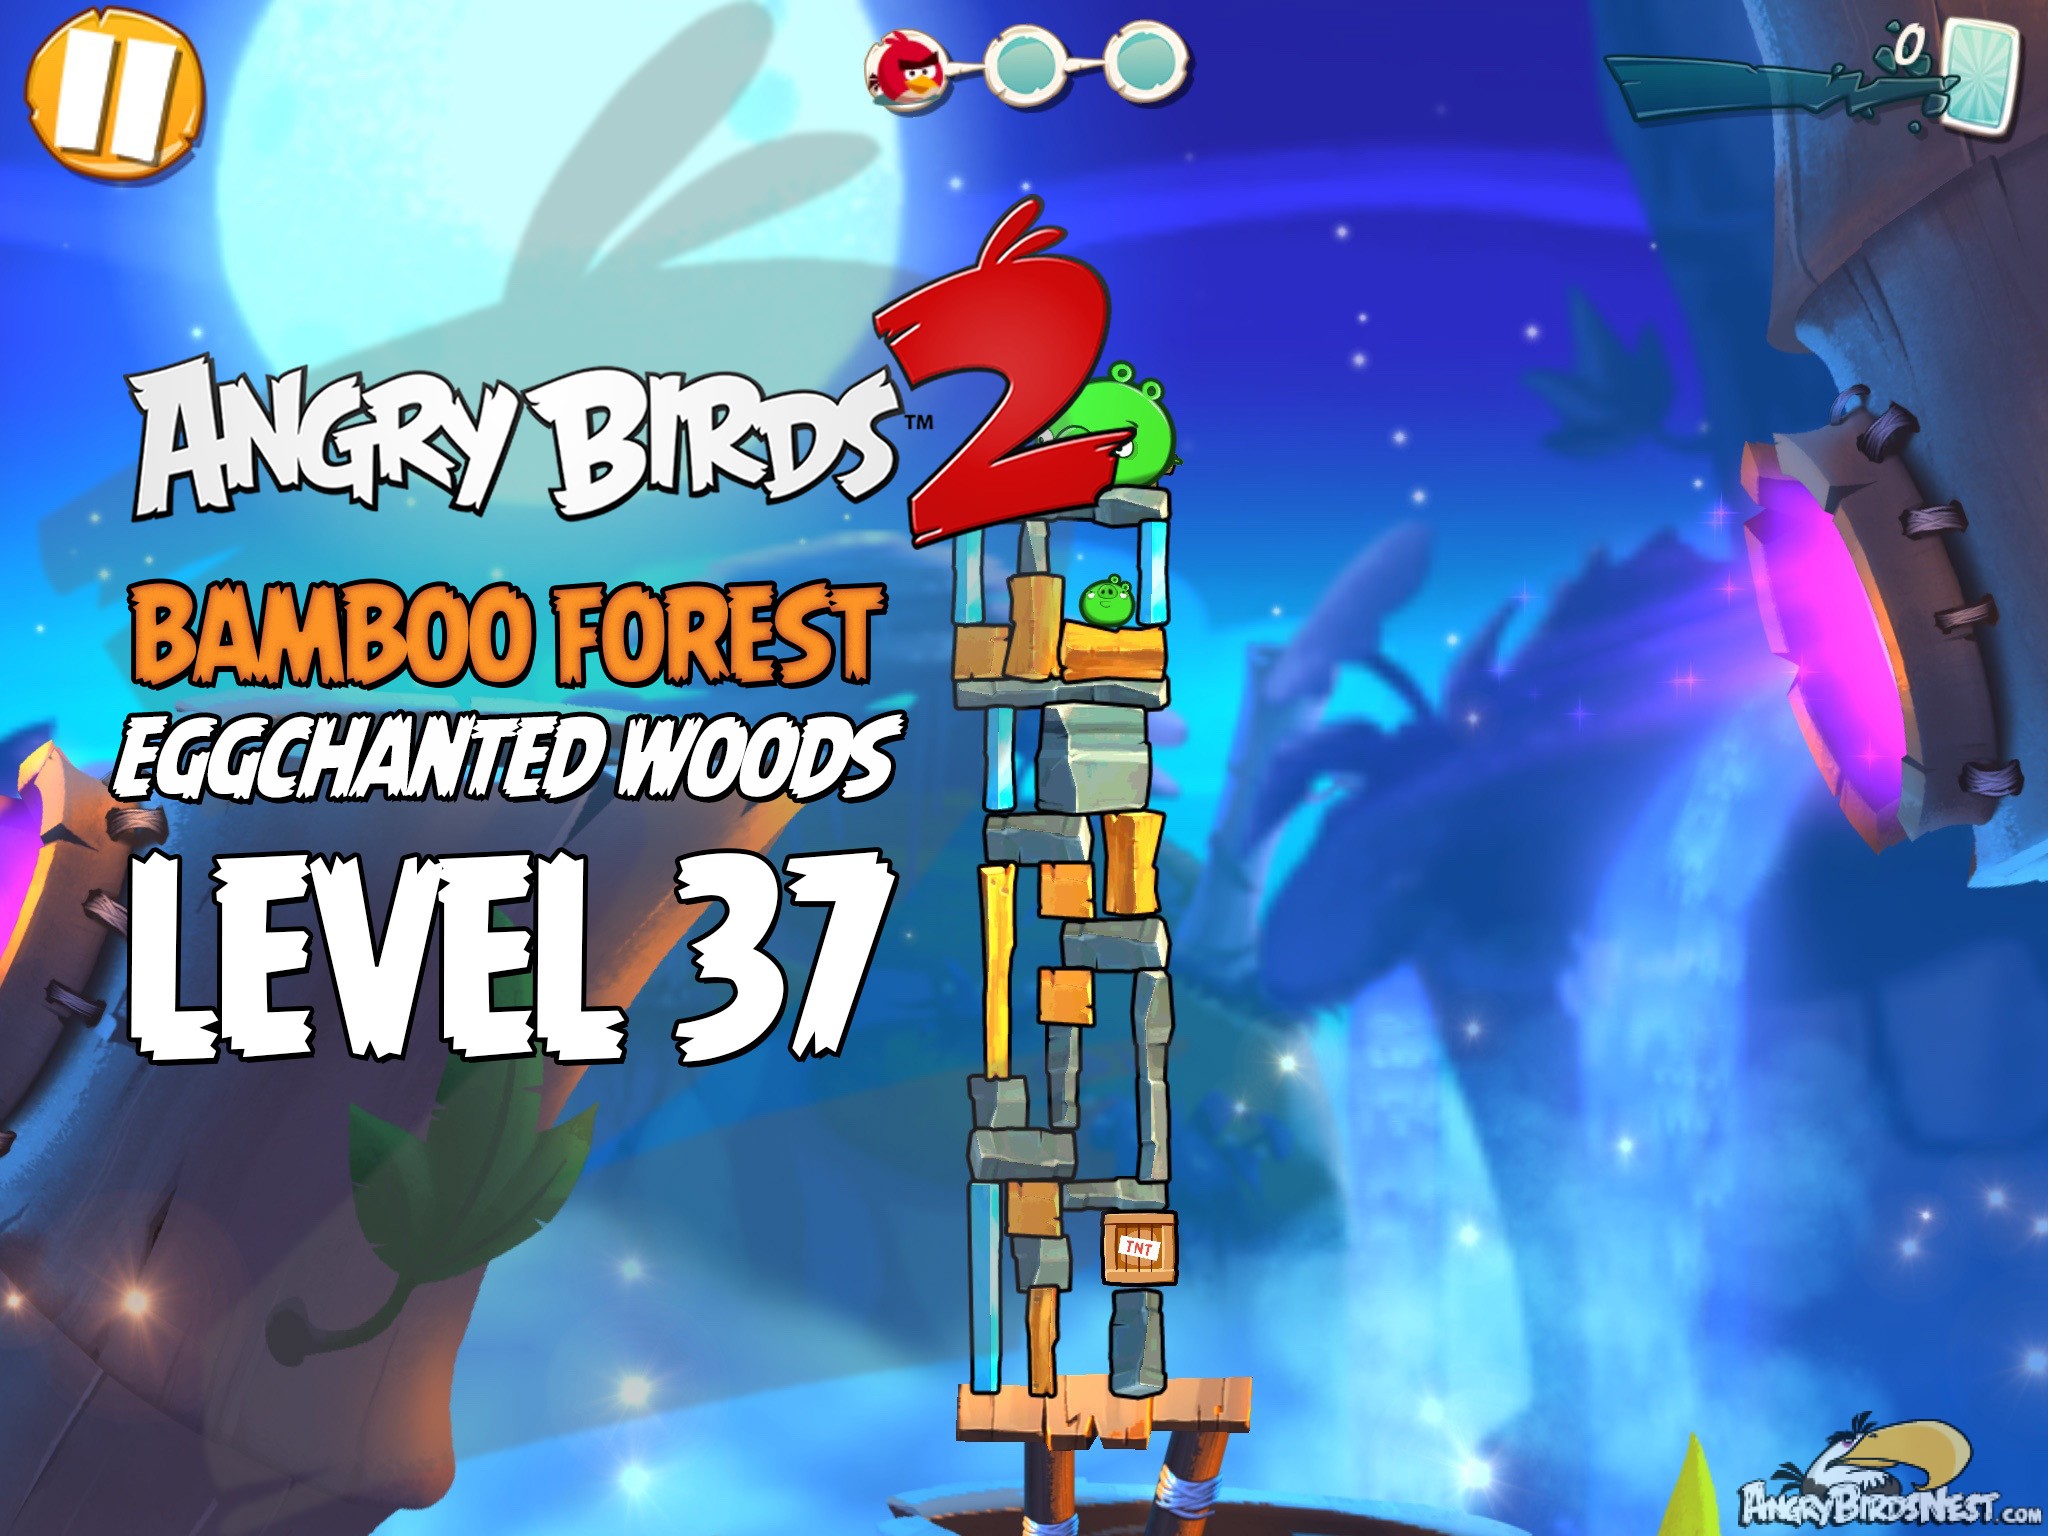 Angry Birds 2 Bamboo Forest Eggchanted Woods Level 37